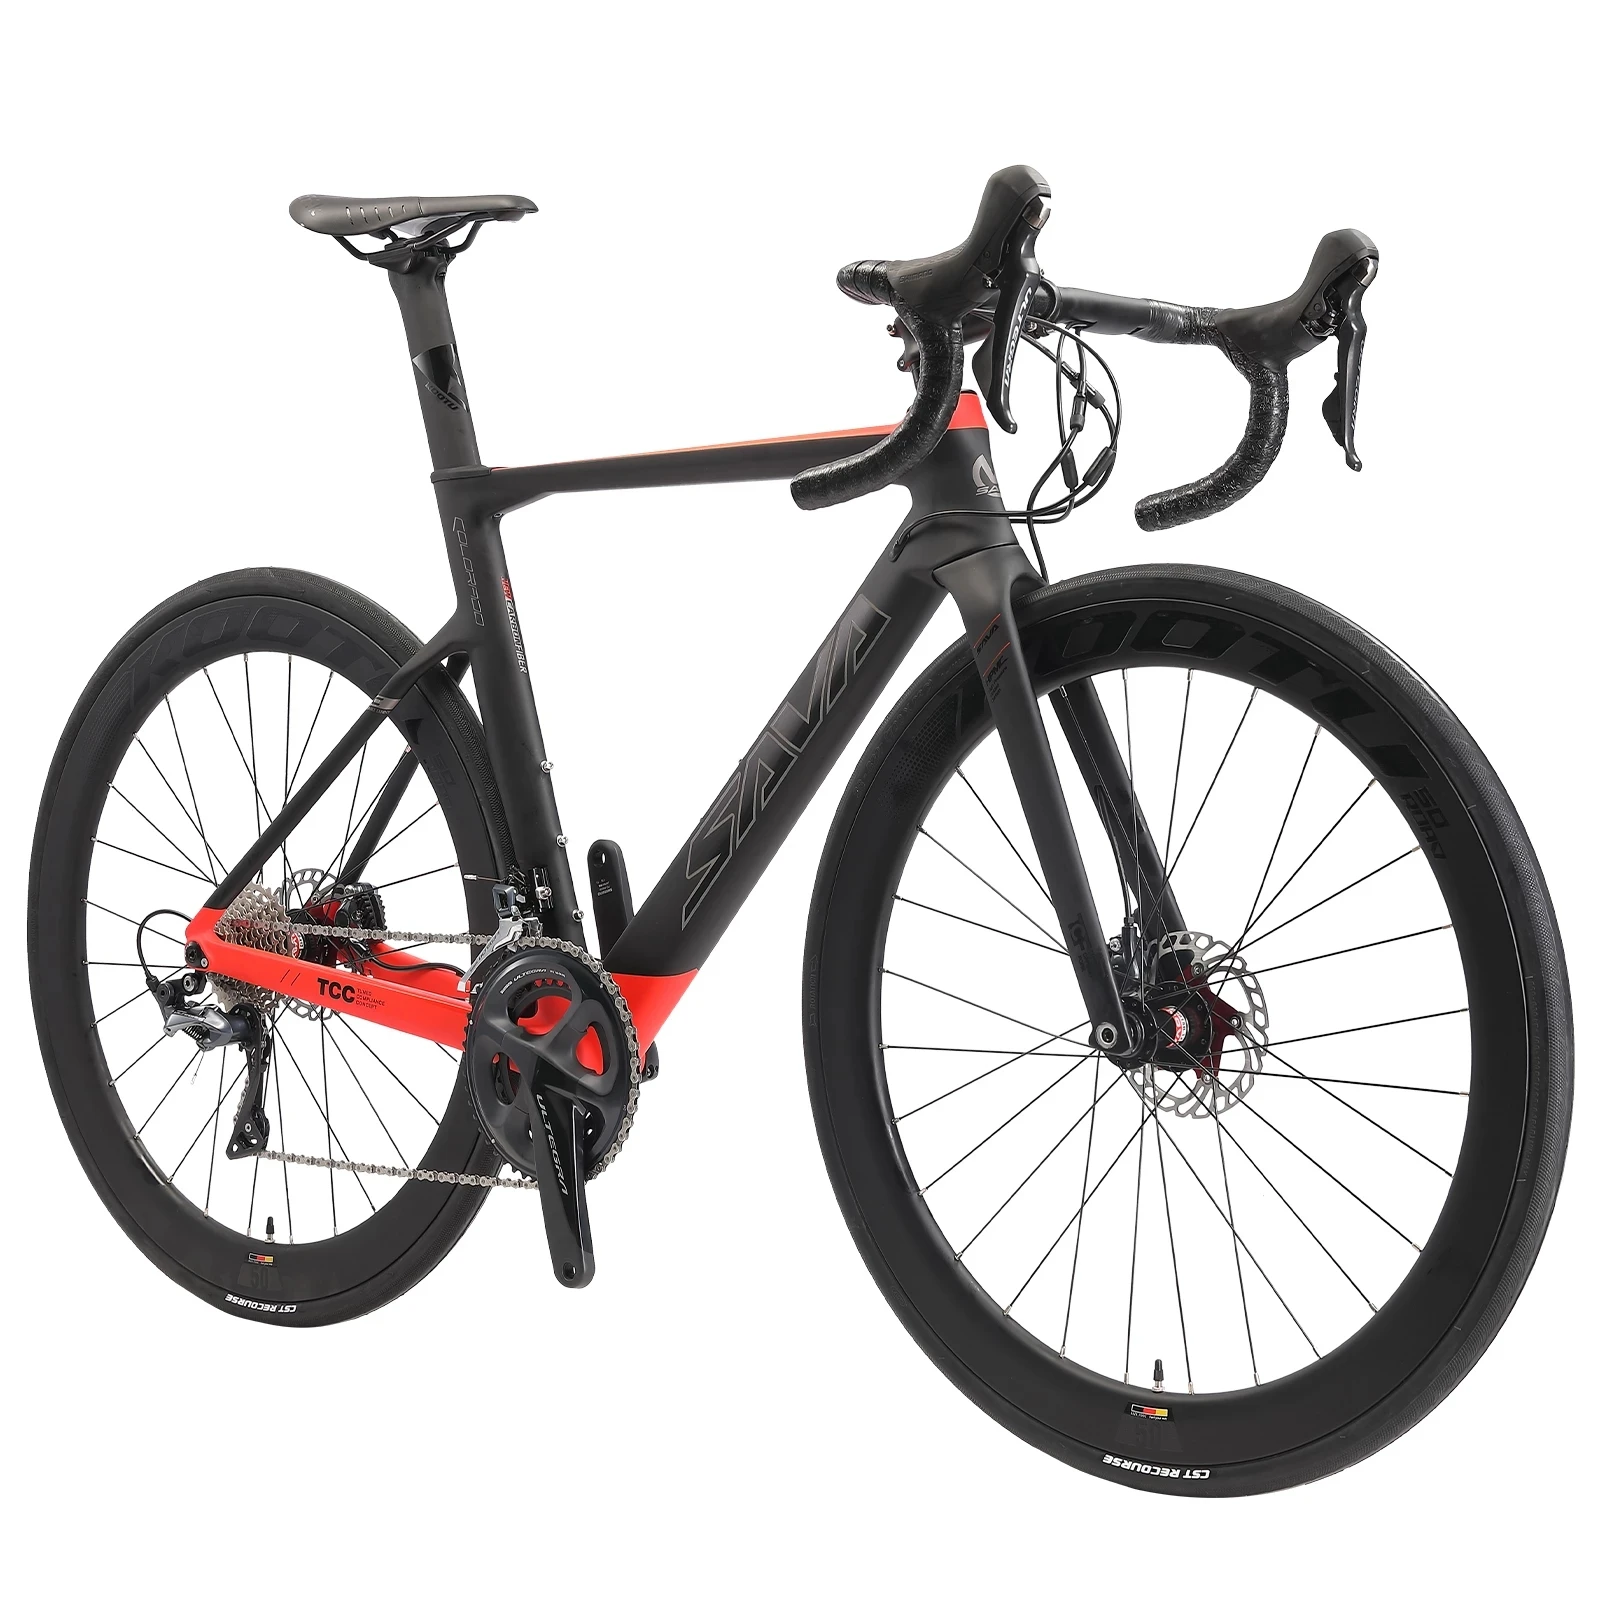 

Ships from US/ SAVA Carbon Fiber Road Bike 22 Speed with Hydraulic Disc Brakes Gravel Road Bike with SHIMAN0 ULTEGRA R8000